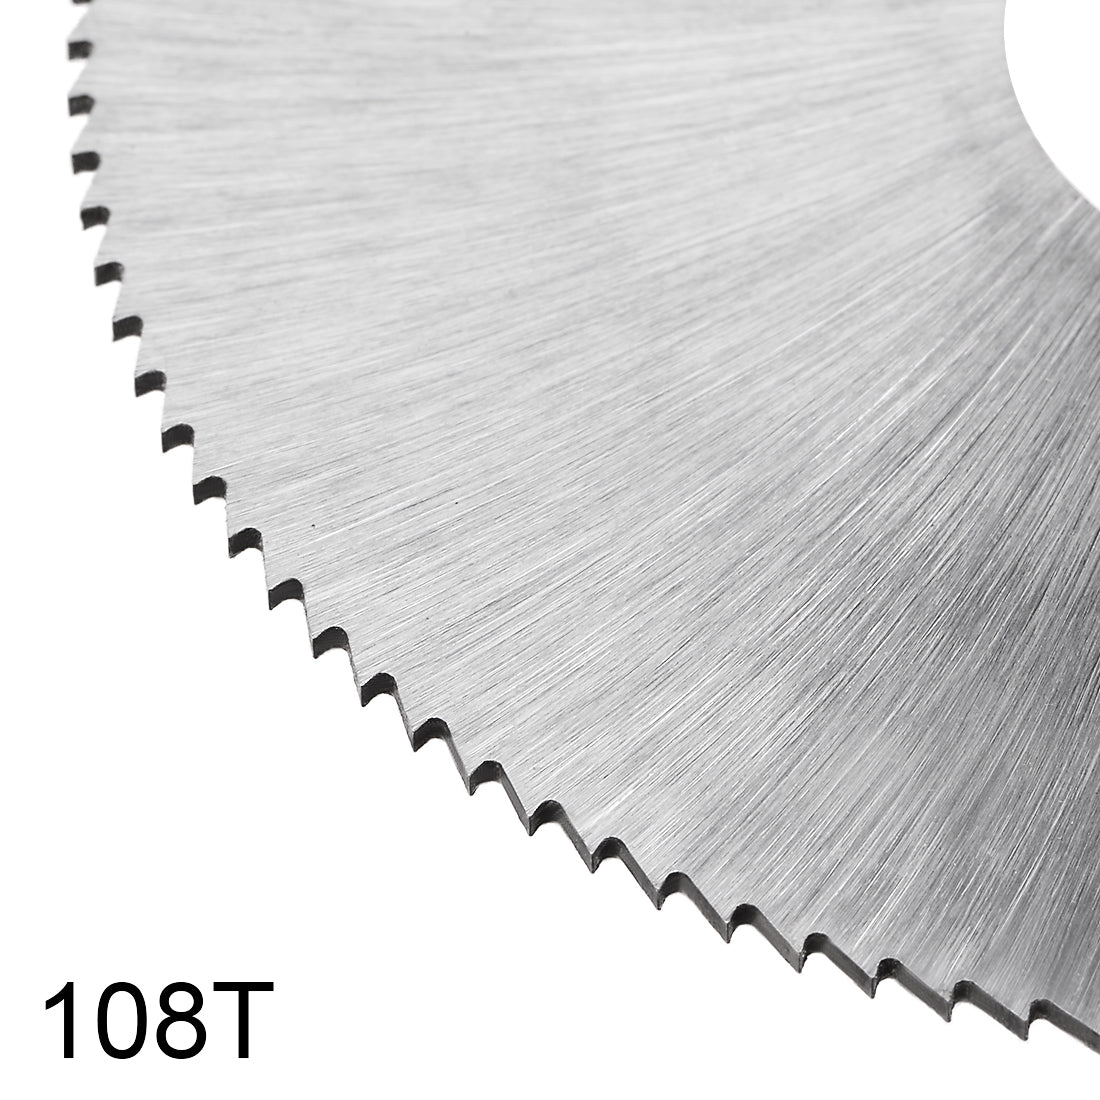 Uxcell Uxcell HSS Saw Blade, 80mm 108 Tooth Circular Cutting Wheel 1.2mm Thick w 22mm Arbor